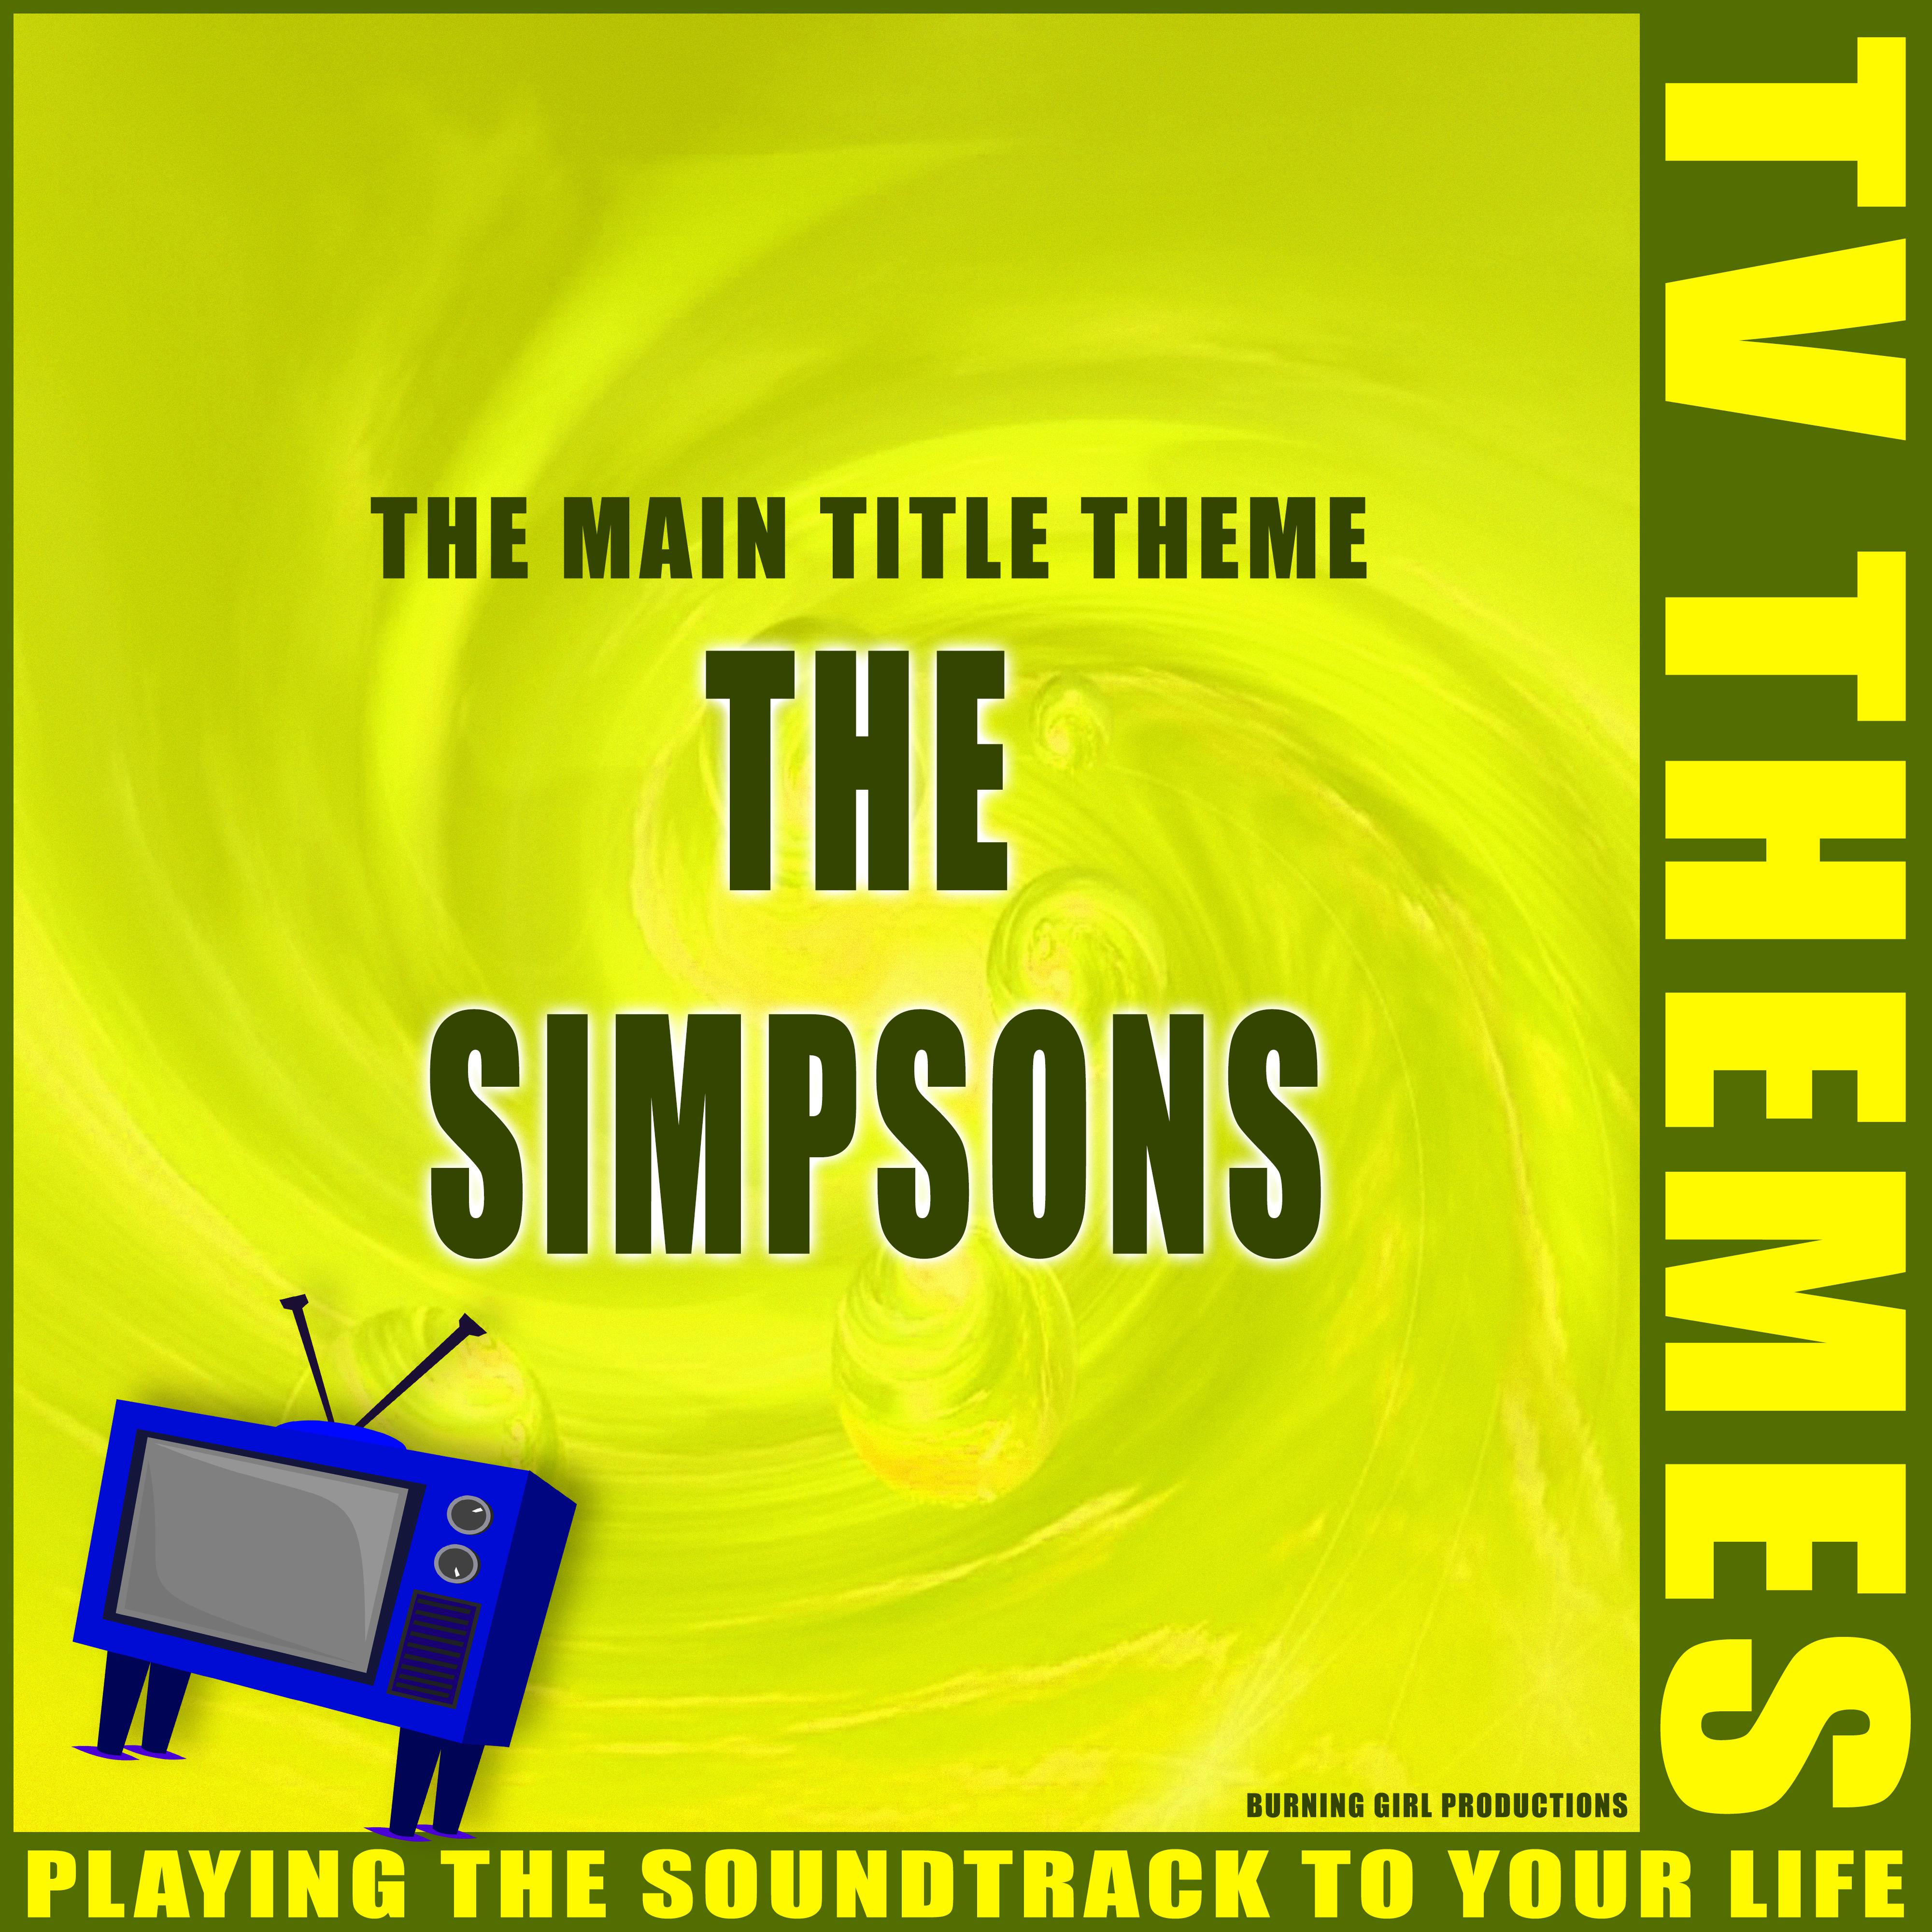 The Main Title Theme - The Simpsons